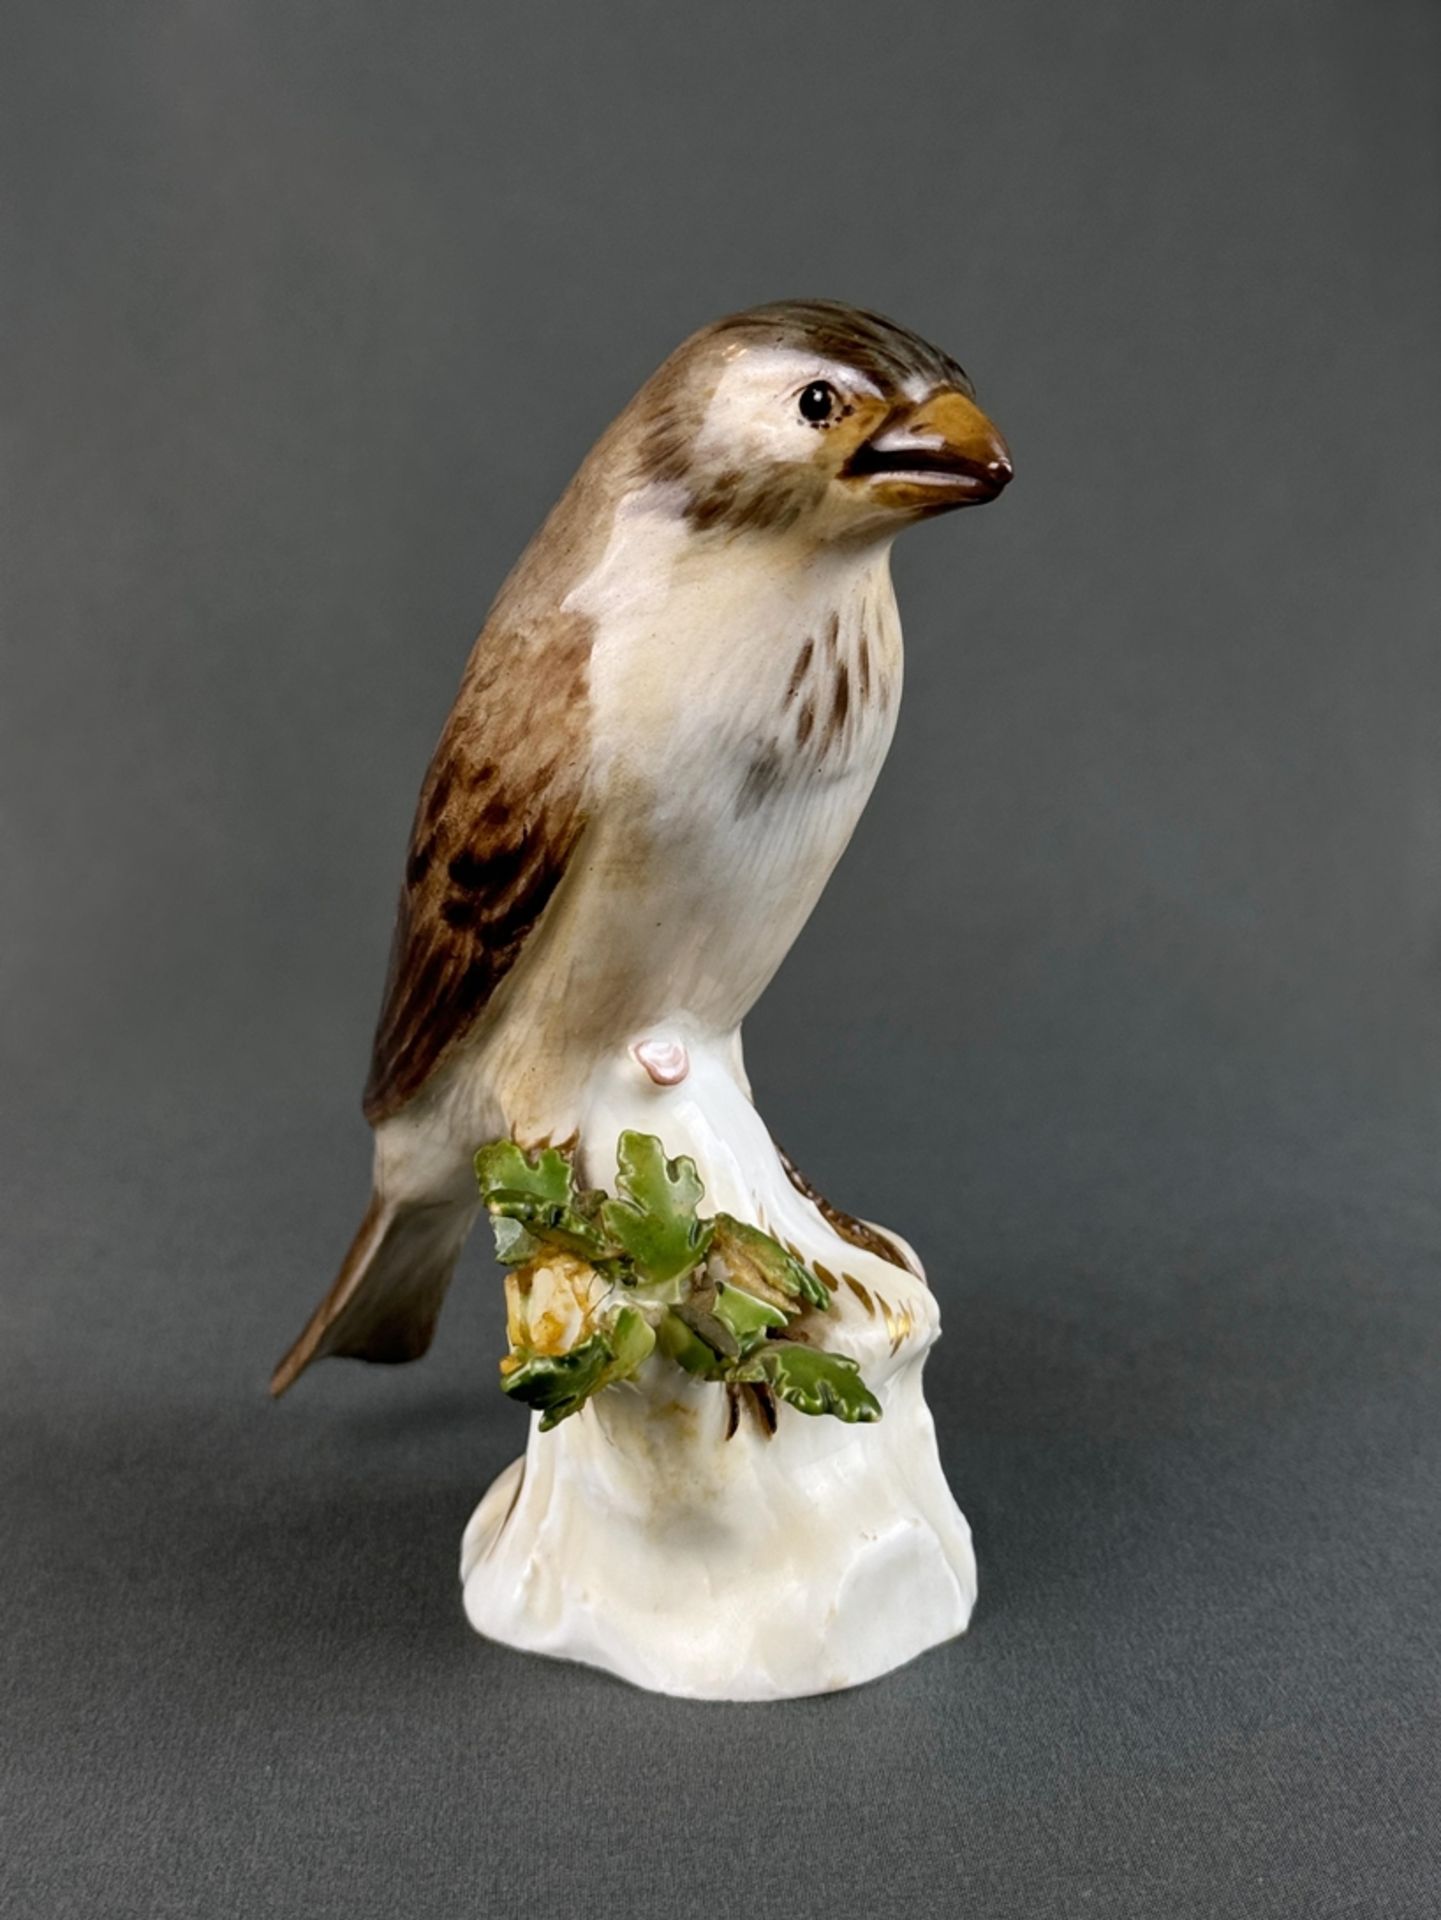 Porcelain figurine "Sparrow" Meissen sword mark, sparrow sitting on a branch base, with leaves, und - Image 2 of 5